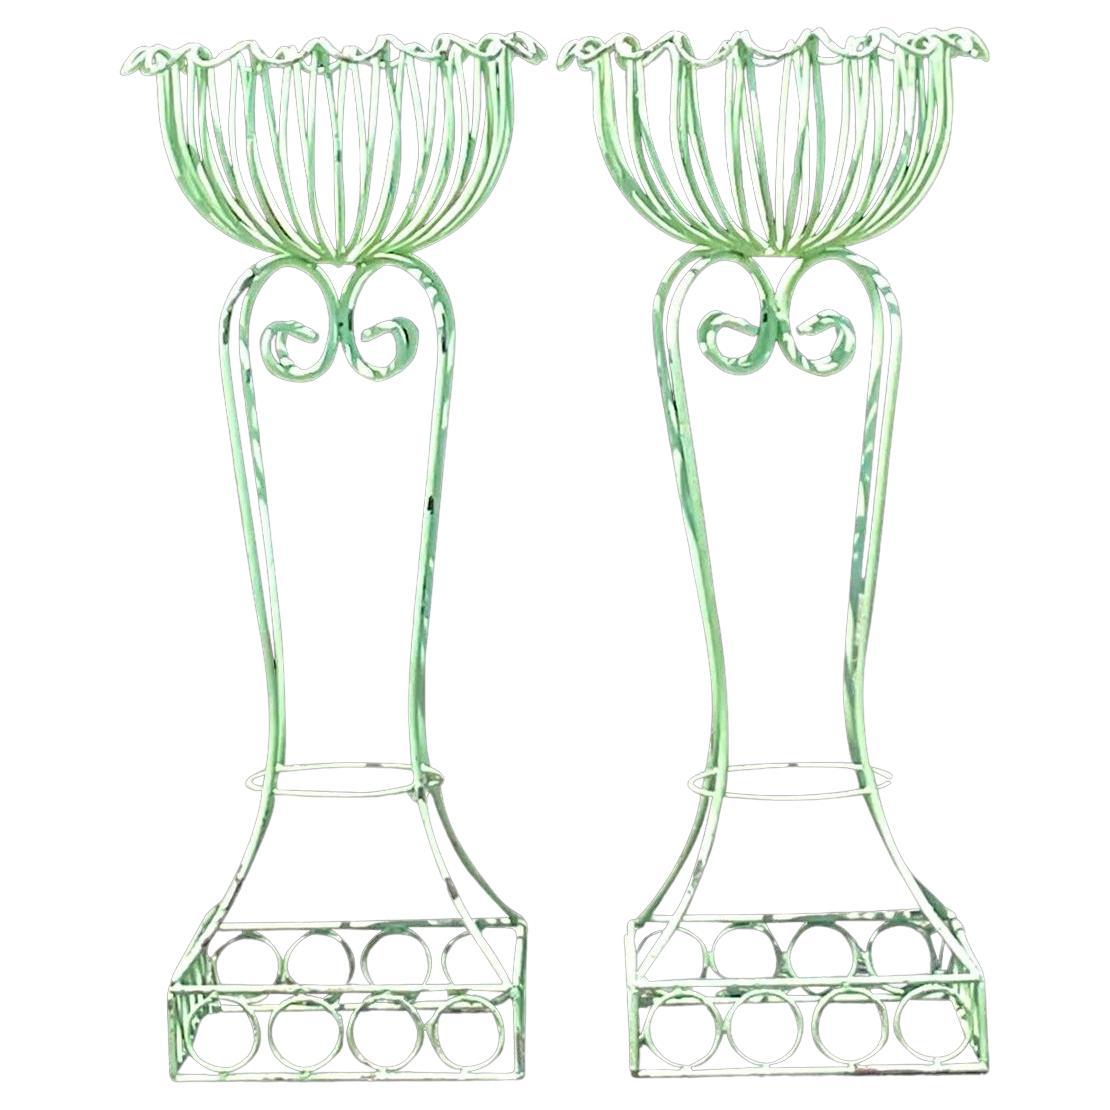 Vintage Regency Scalloped Wrought Iron Plant Stands - a Pair